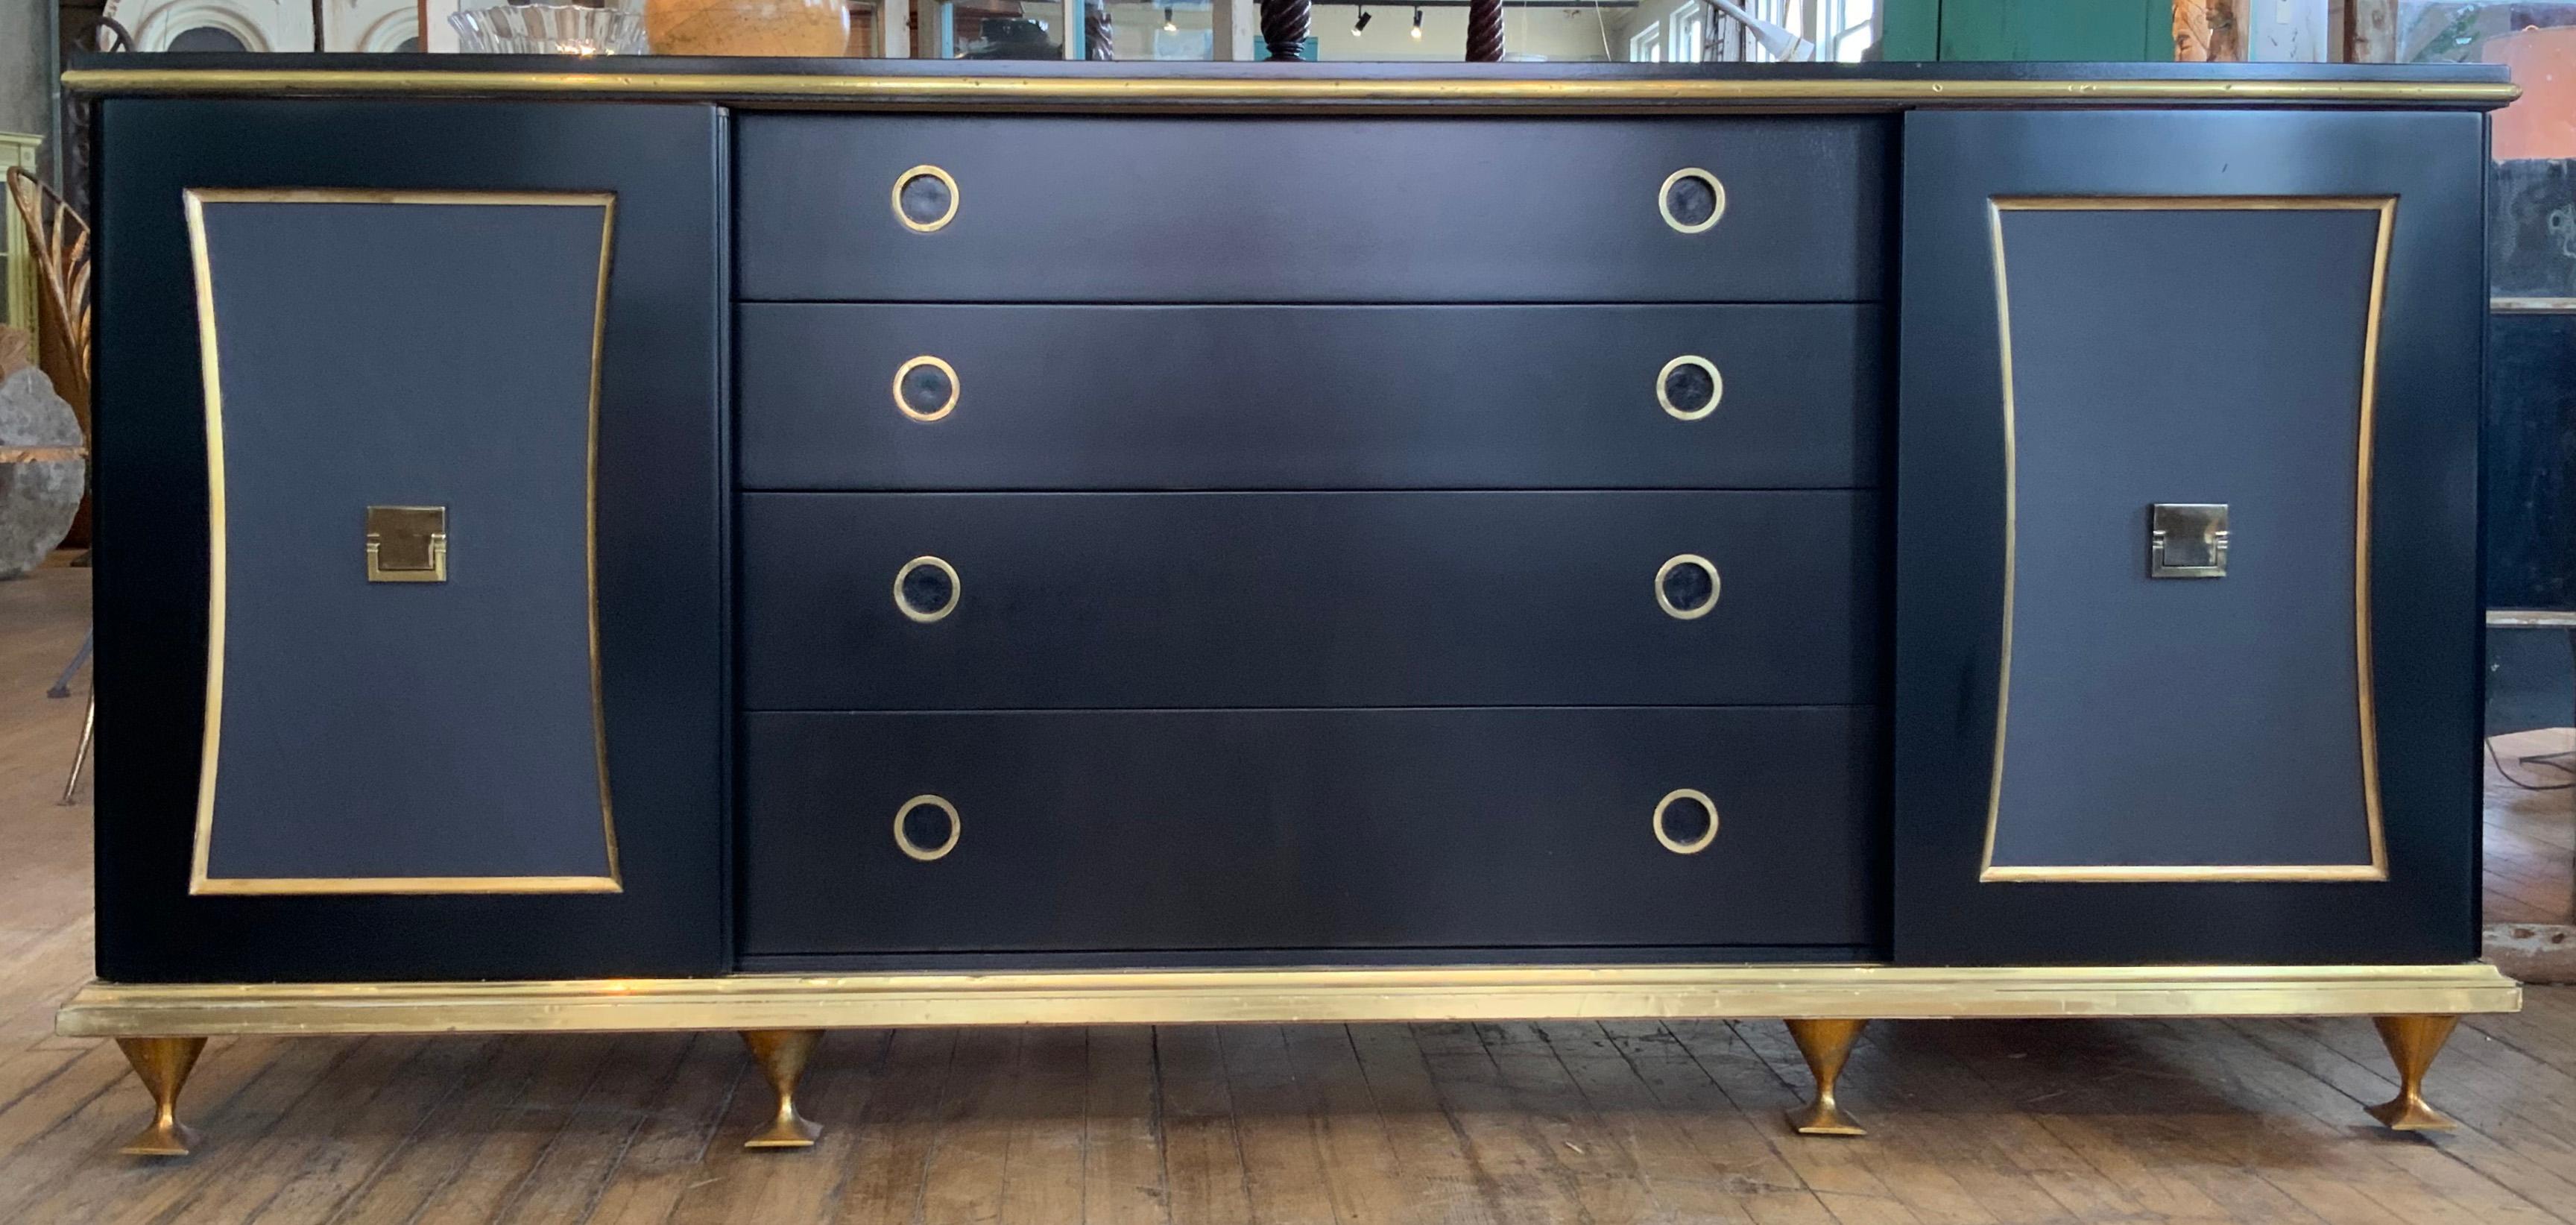 An incredible 1950s modern cabinet designed by Renzo Rutili for Johnson Furniture. Raised on charming brass feet and a brass base, the case has been ebonized and the doors are paneled in gray/blue leather. The center doors slide apart to reveal a